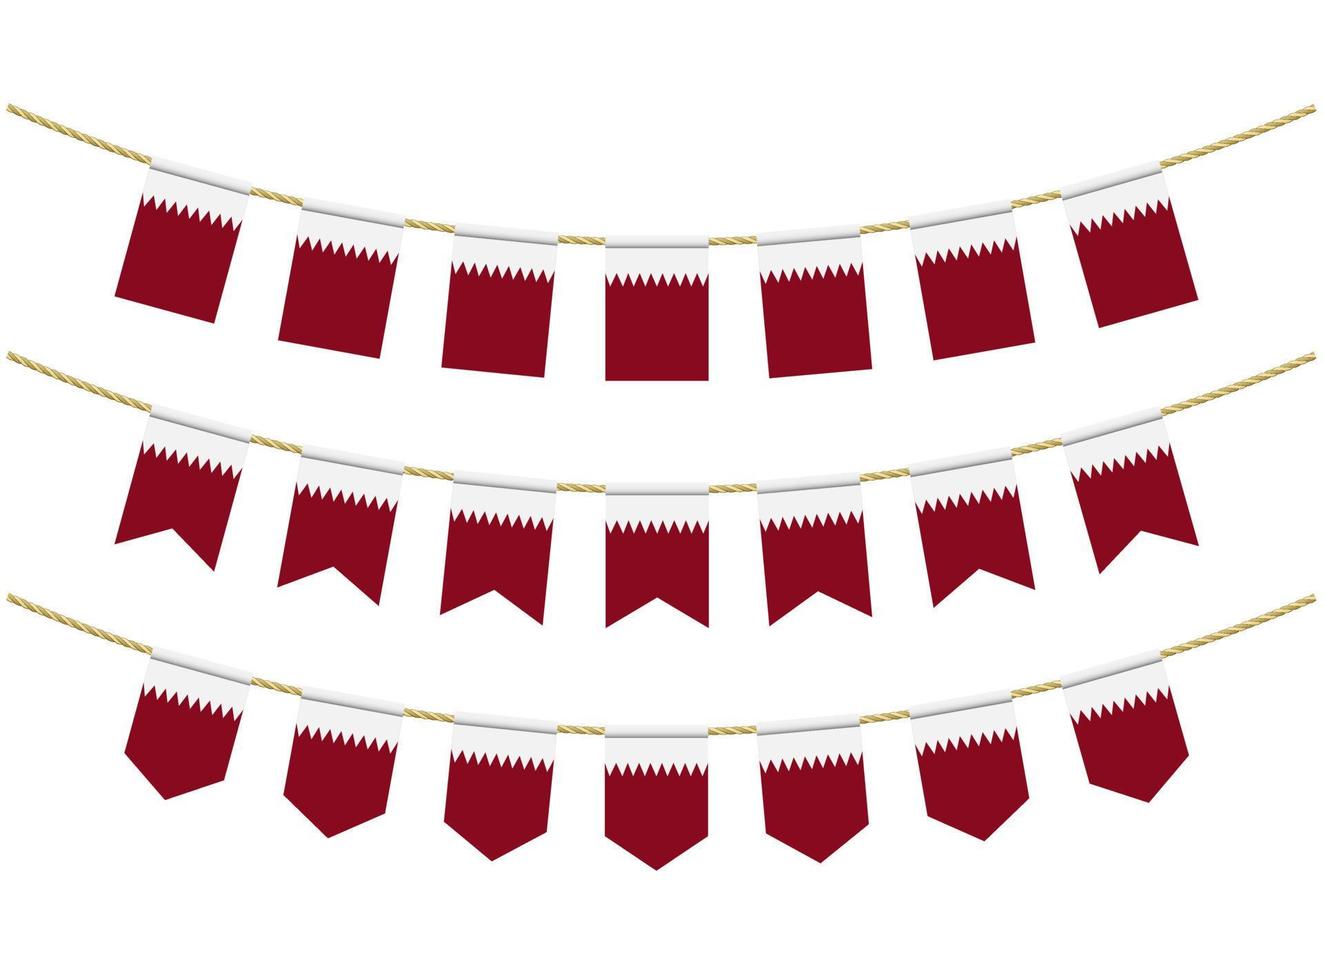 Qatar flag on the ropes on white background. Set of Patriotic bunting flags. Bunting decoration of Qatar flag vector